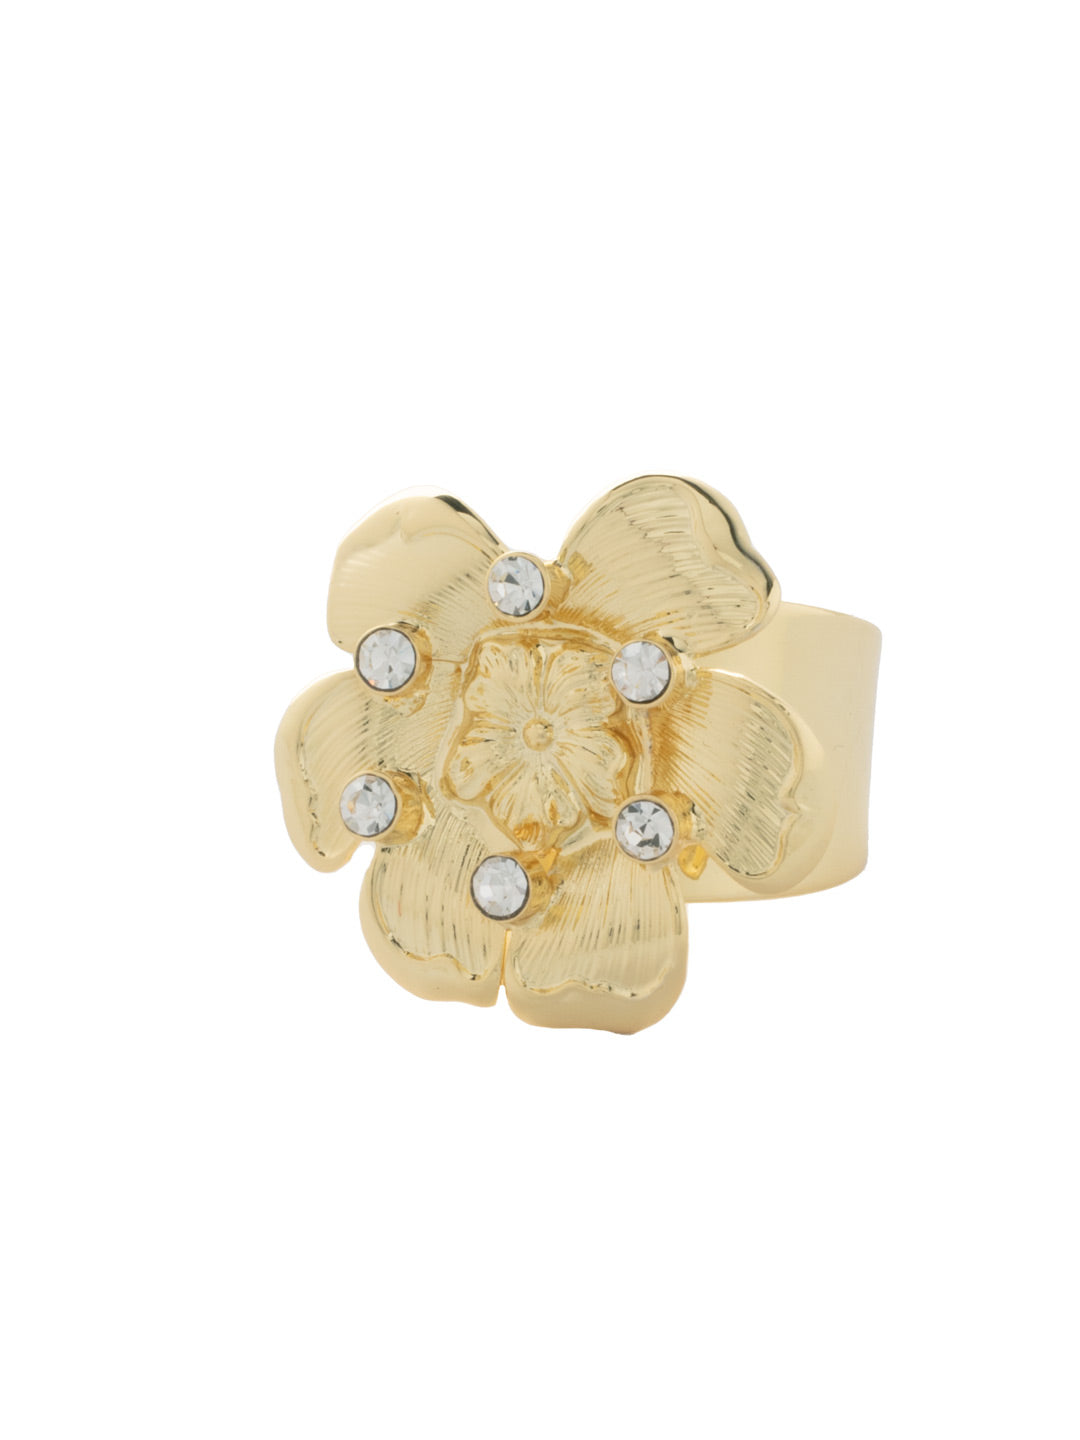 Fleur Embellished Cocktail Ring - RFL12BGCRY - <p>The Fleur Embellished Cocktail Ring features a crystal embellished flower on an adjustable metal band. From Sorrelli's Crystal collection in our Bright Gold-tone finish.</p>